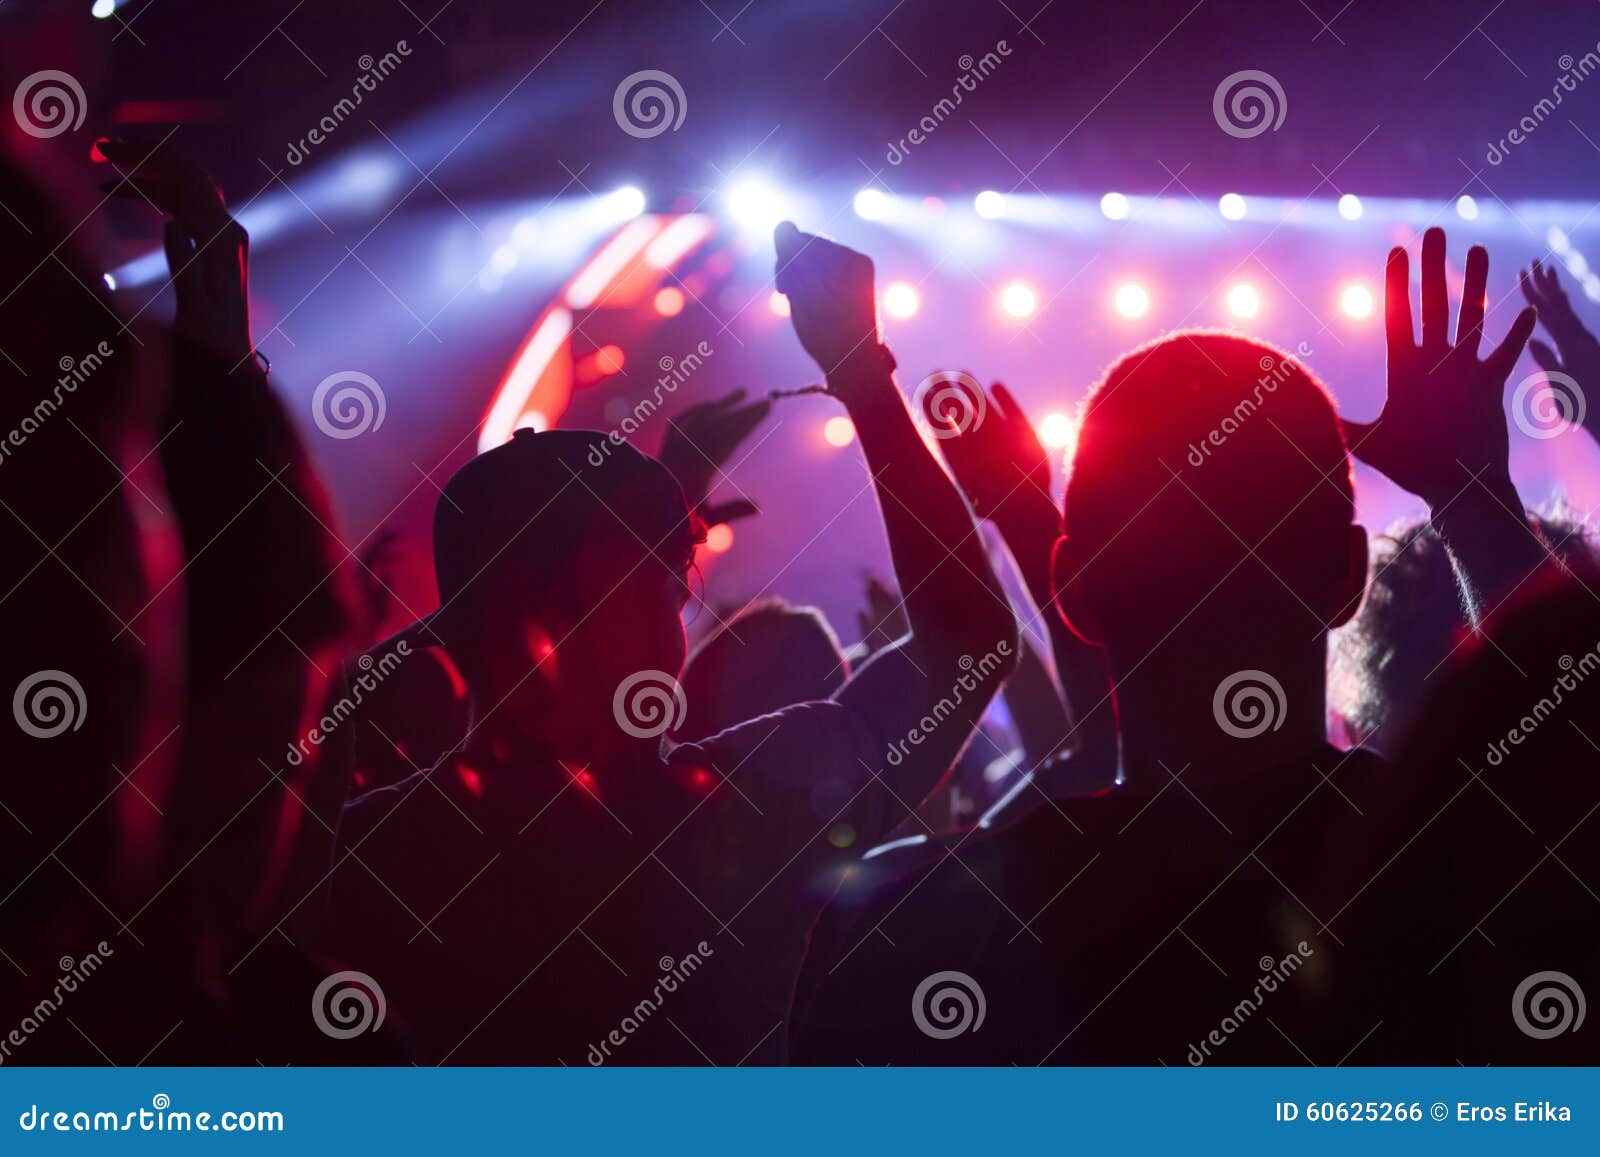 Crowd at concert stock photo. Image of silhouette, effects - 60625266